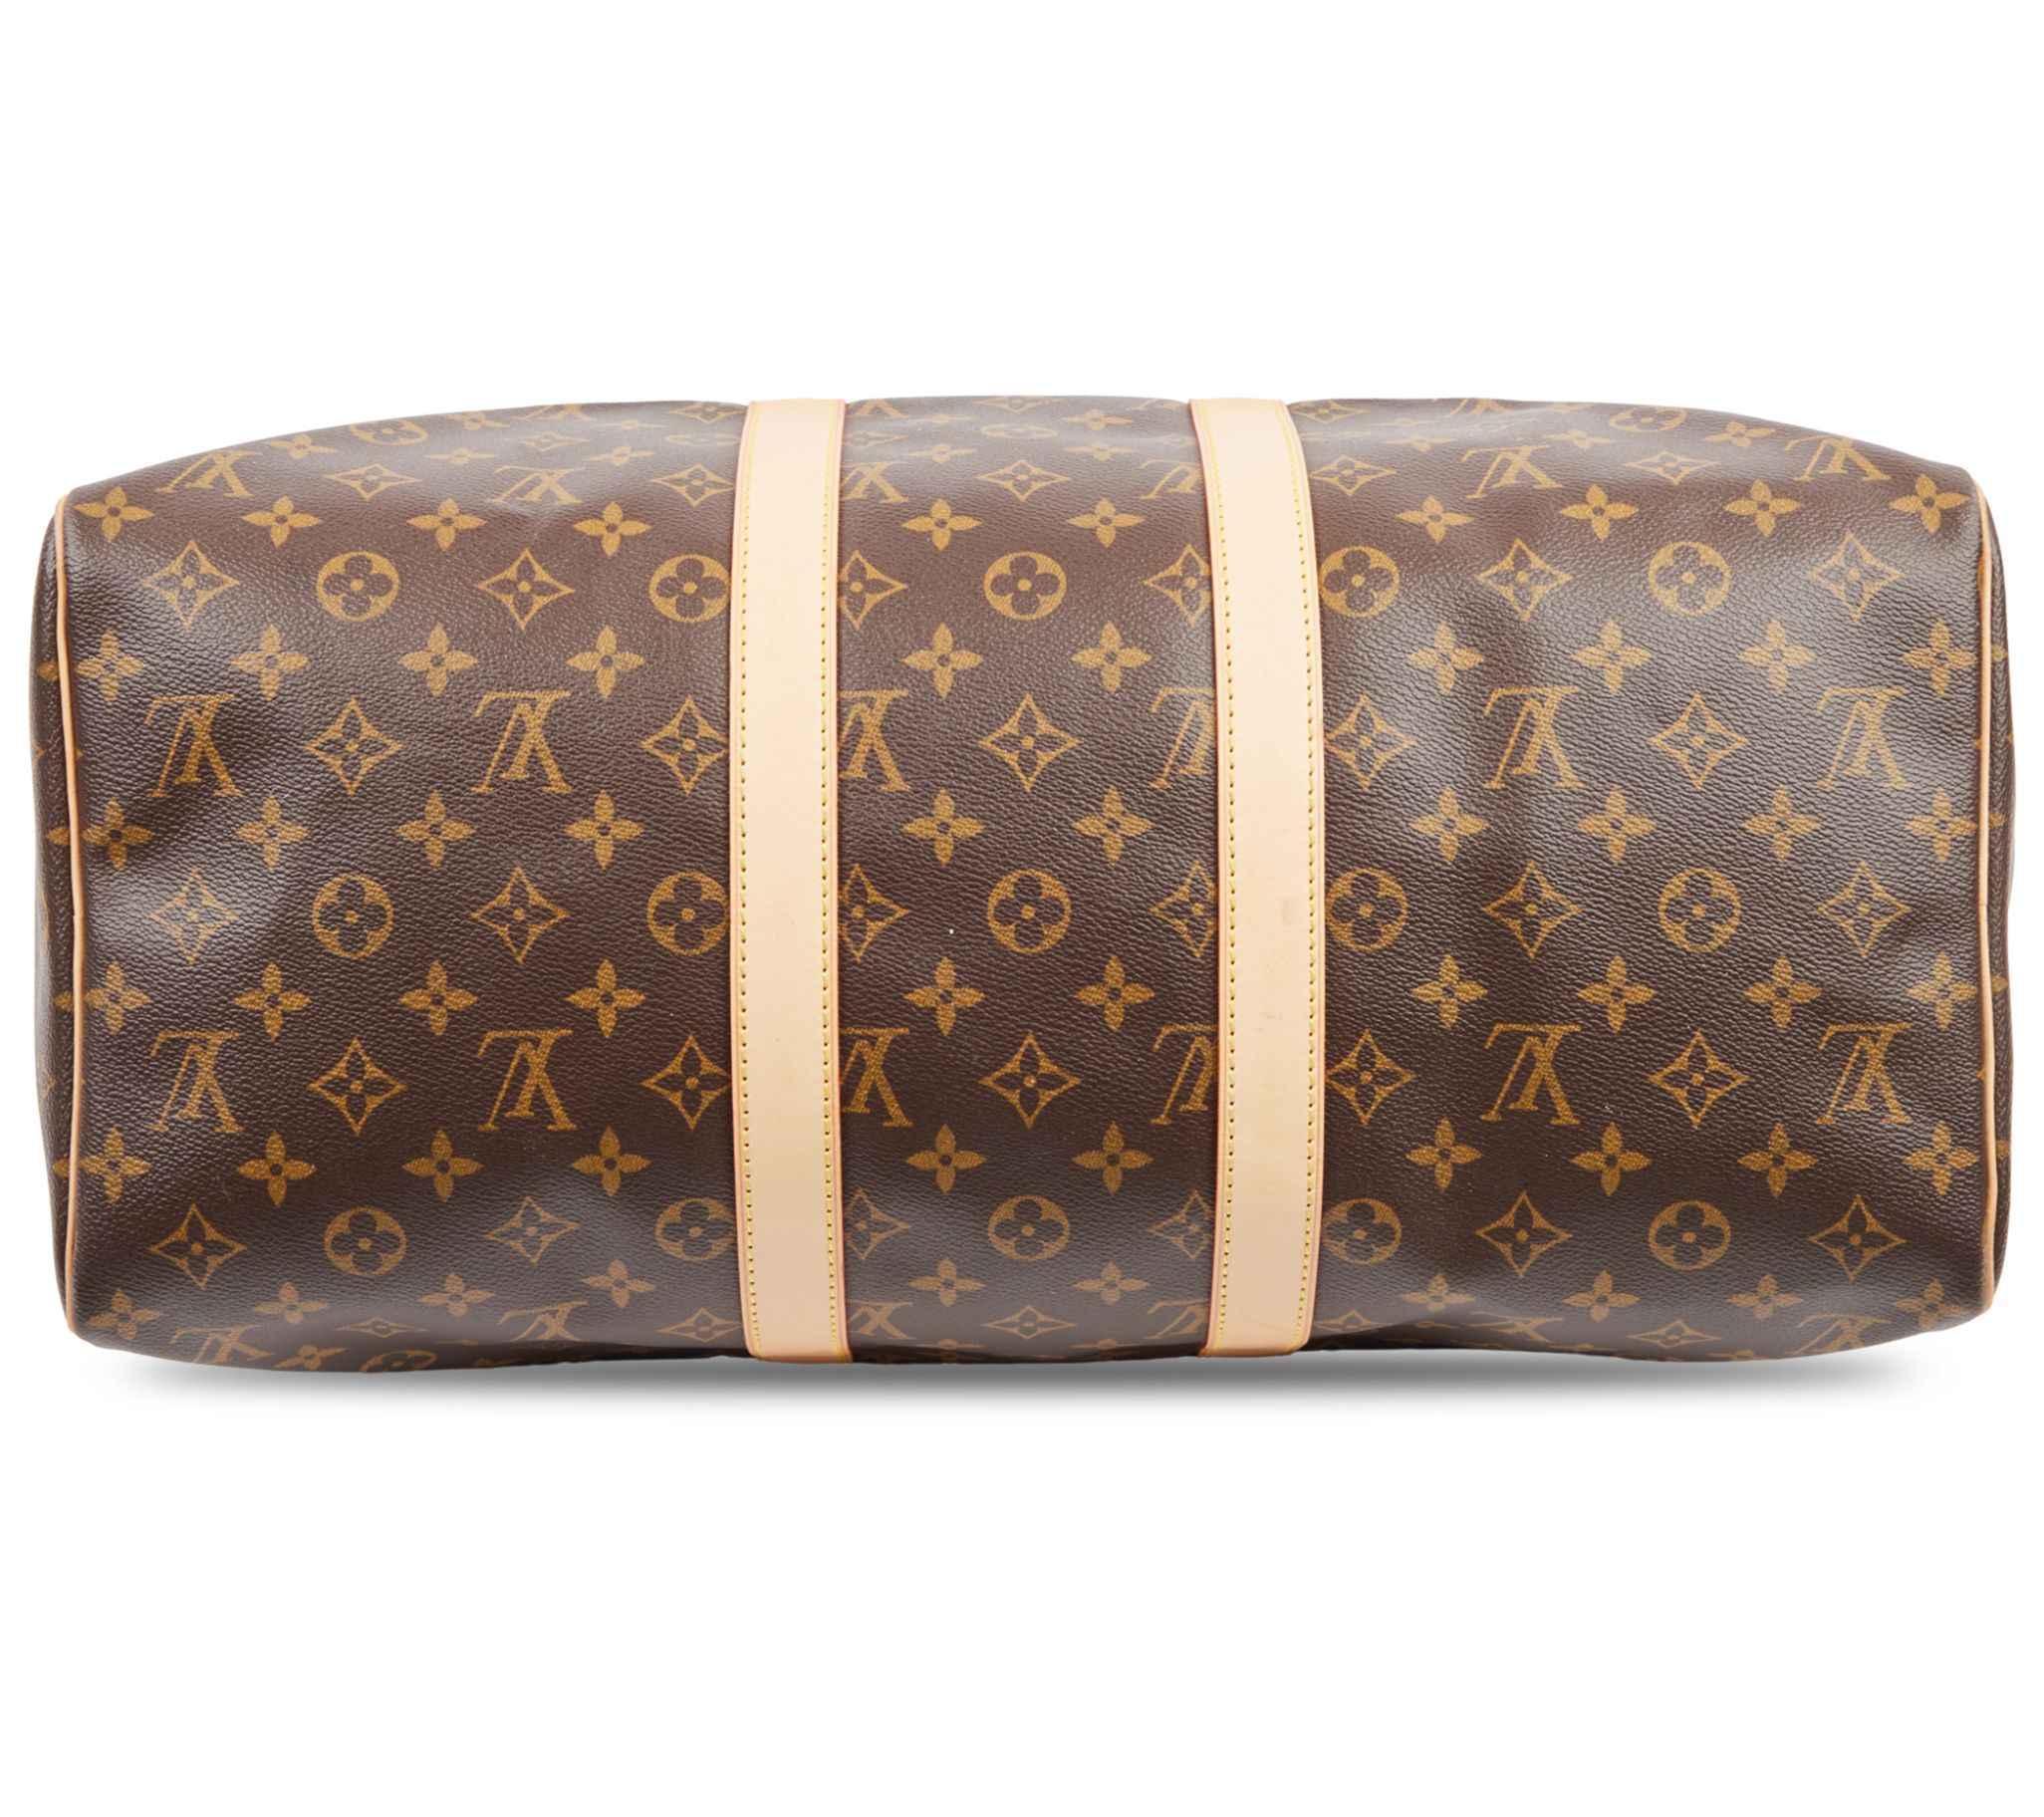 Best Louis Vuitton Toiletry Bag for sale in Topeka, Kansas for 2023